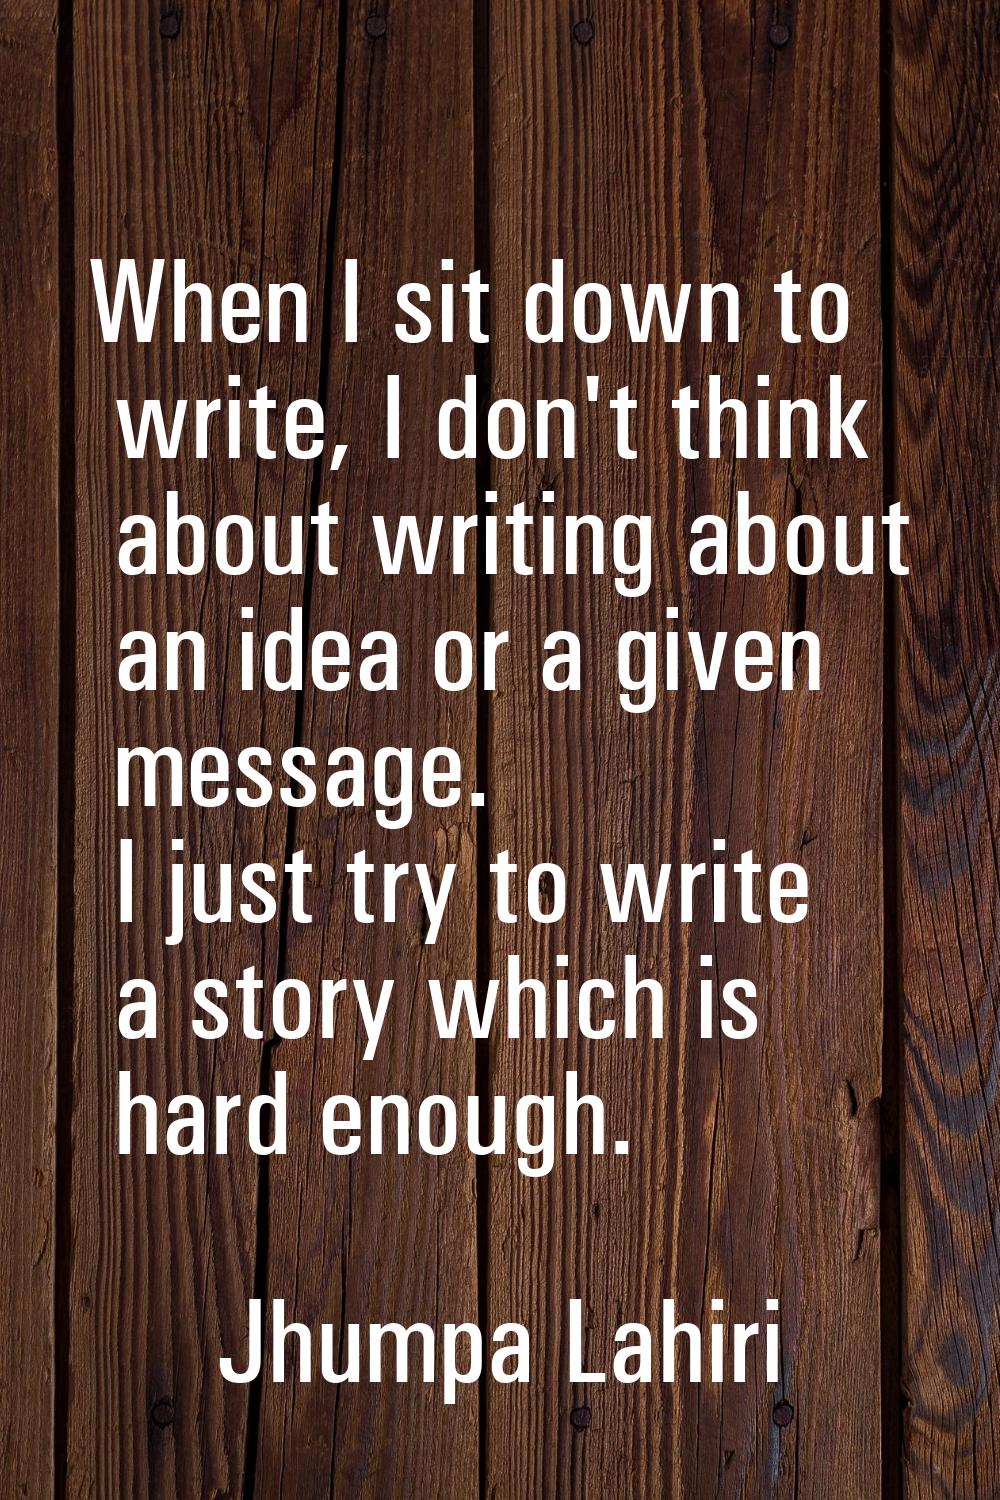 When I sit down to write, I don't think about writing about an idea or a given message. I just try 